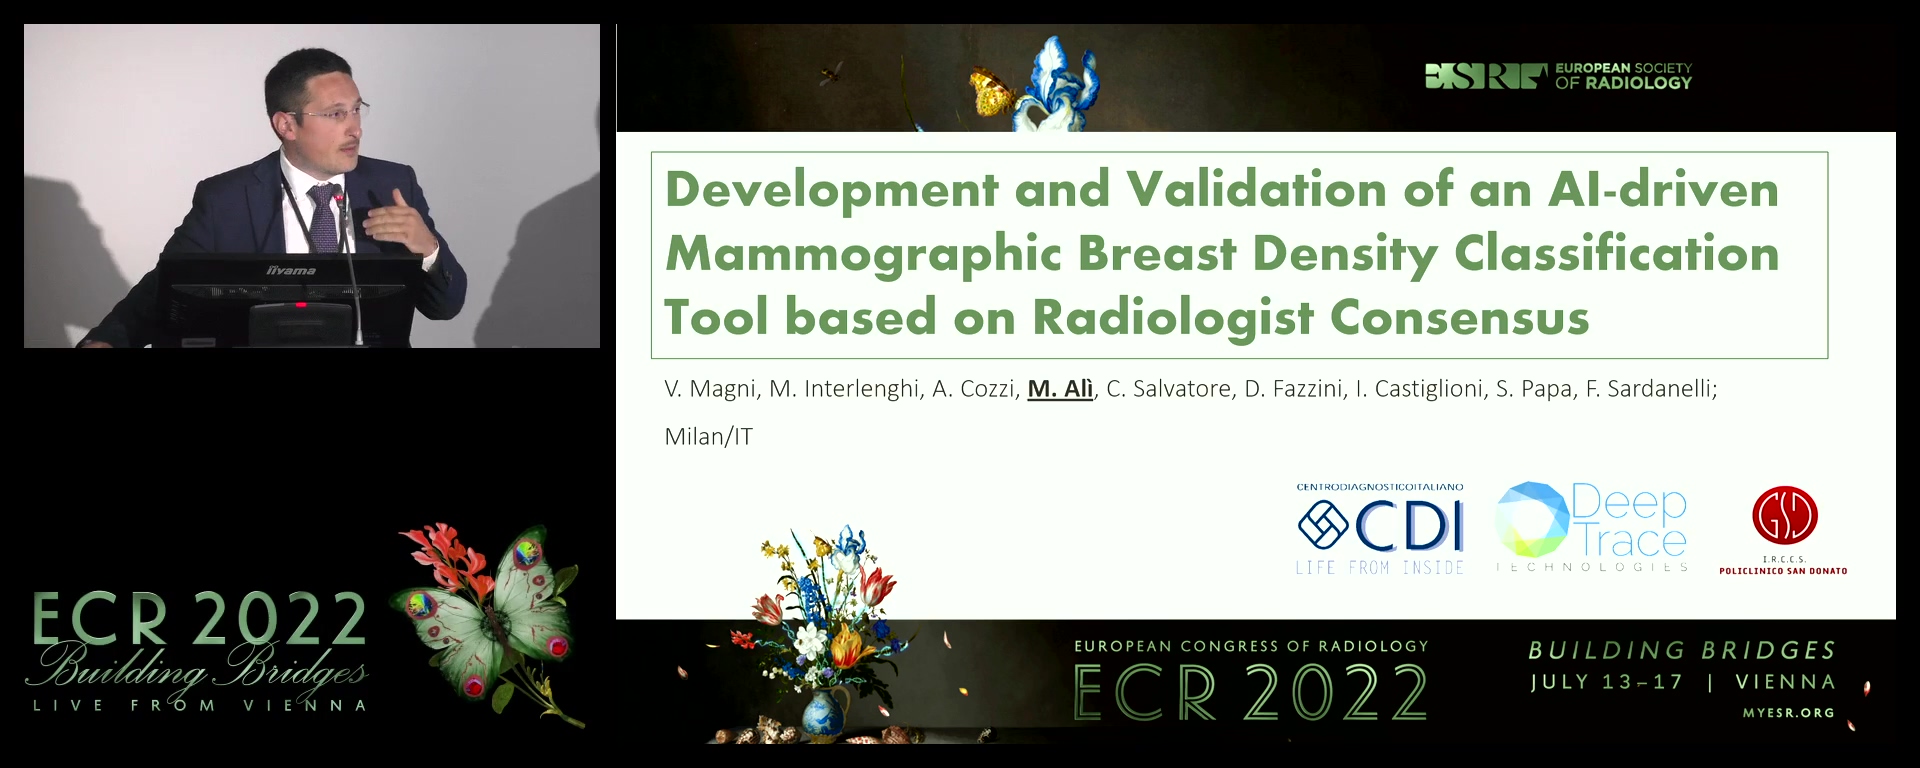 Development and validation of an AI-driven mammographic breast density classification tool based on radiologist consensus